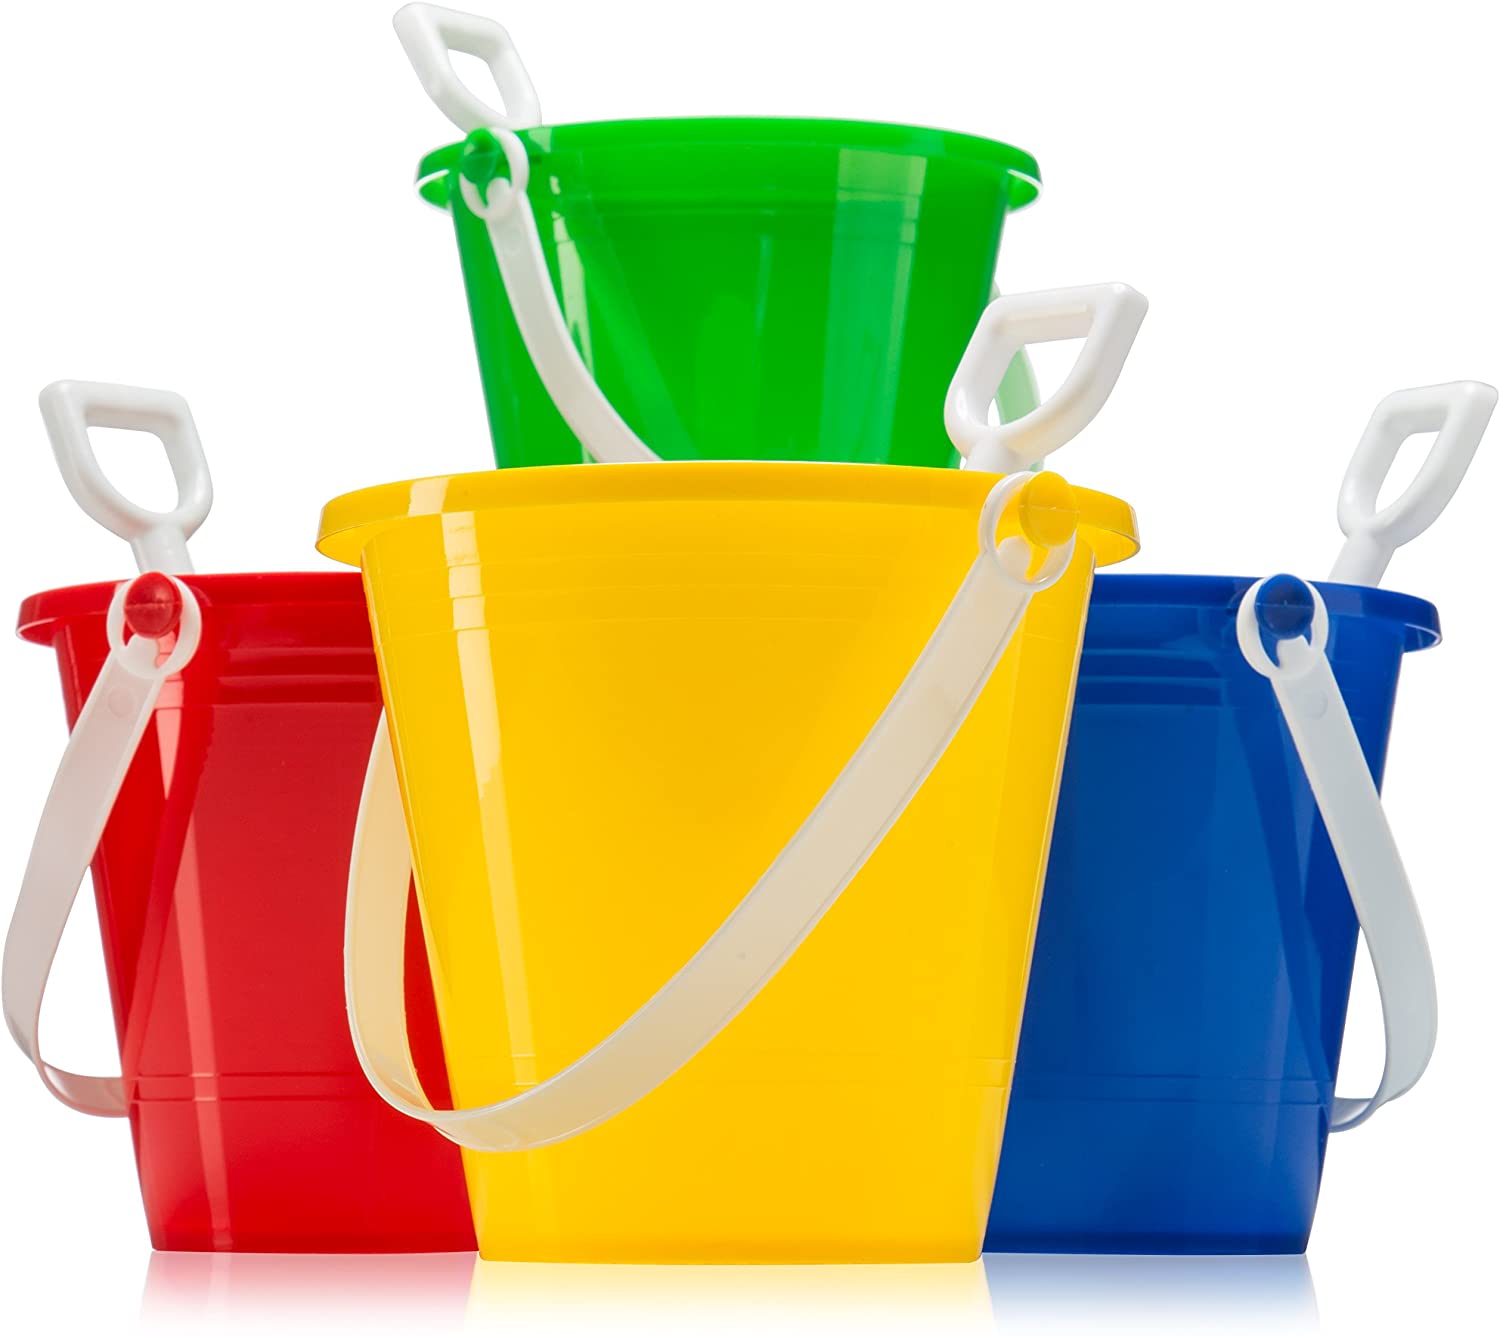 JoyX 5" Inch Beach Pails Sand Buckets and Sand Shovels Set for Kids | Beach and Sand Toys at The Beach | Use for Sand Molds at The Sandbox (Pack of 6 Sets) - image 4 of 7